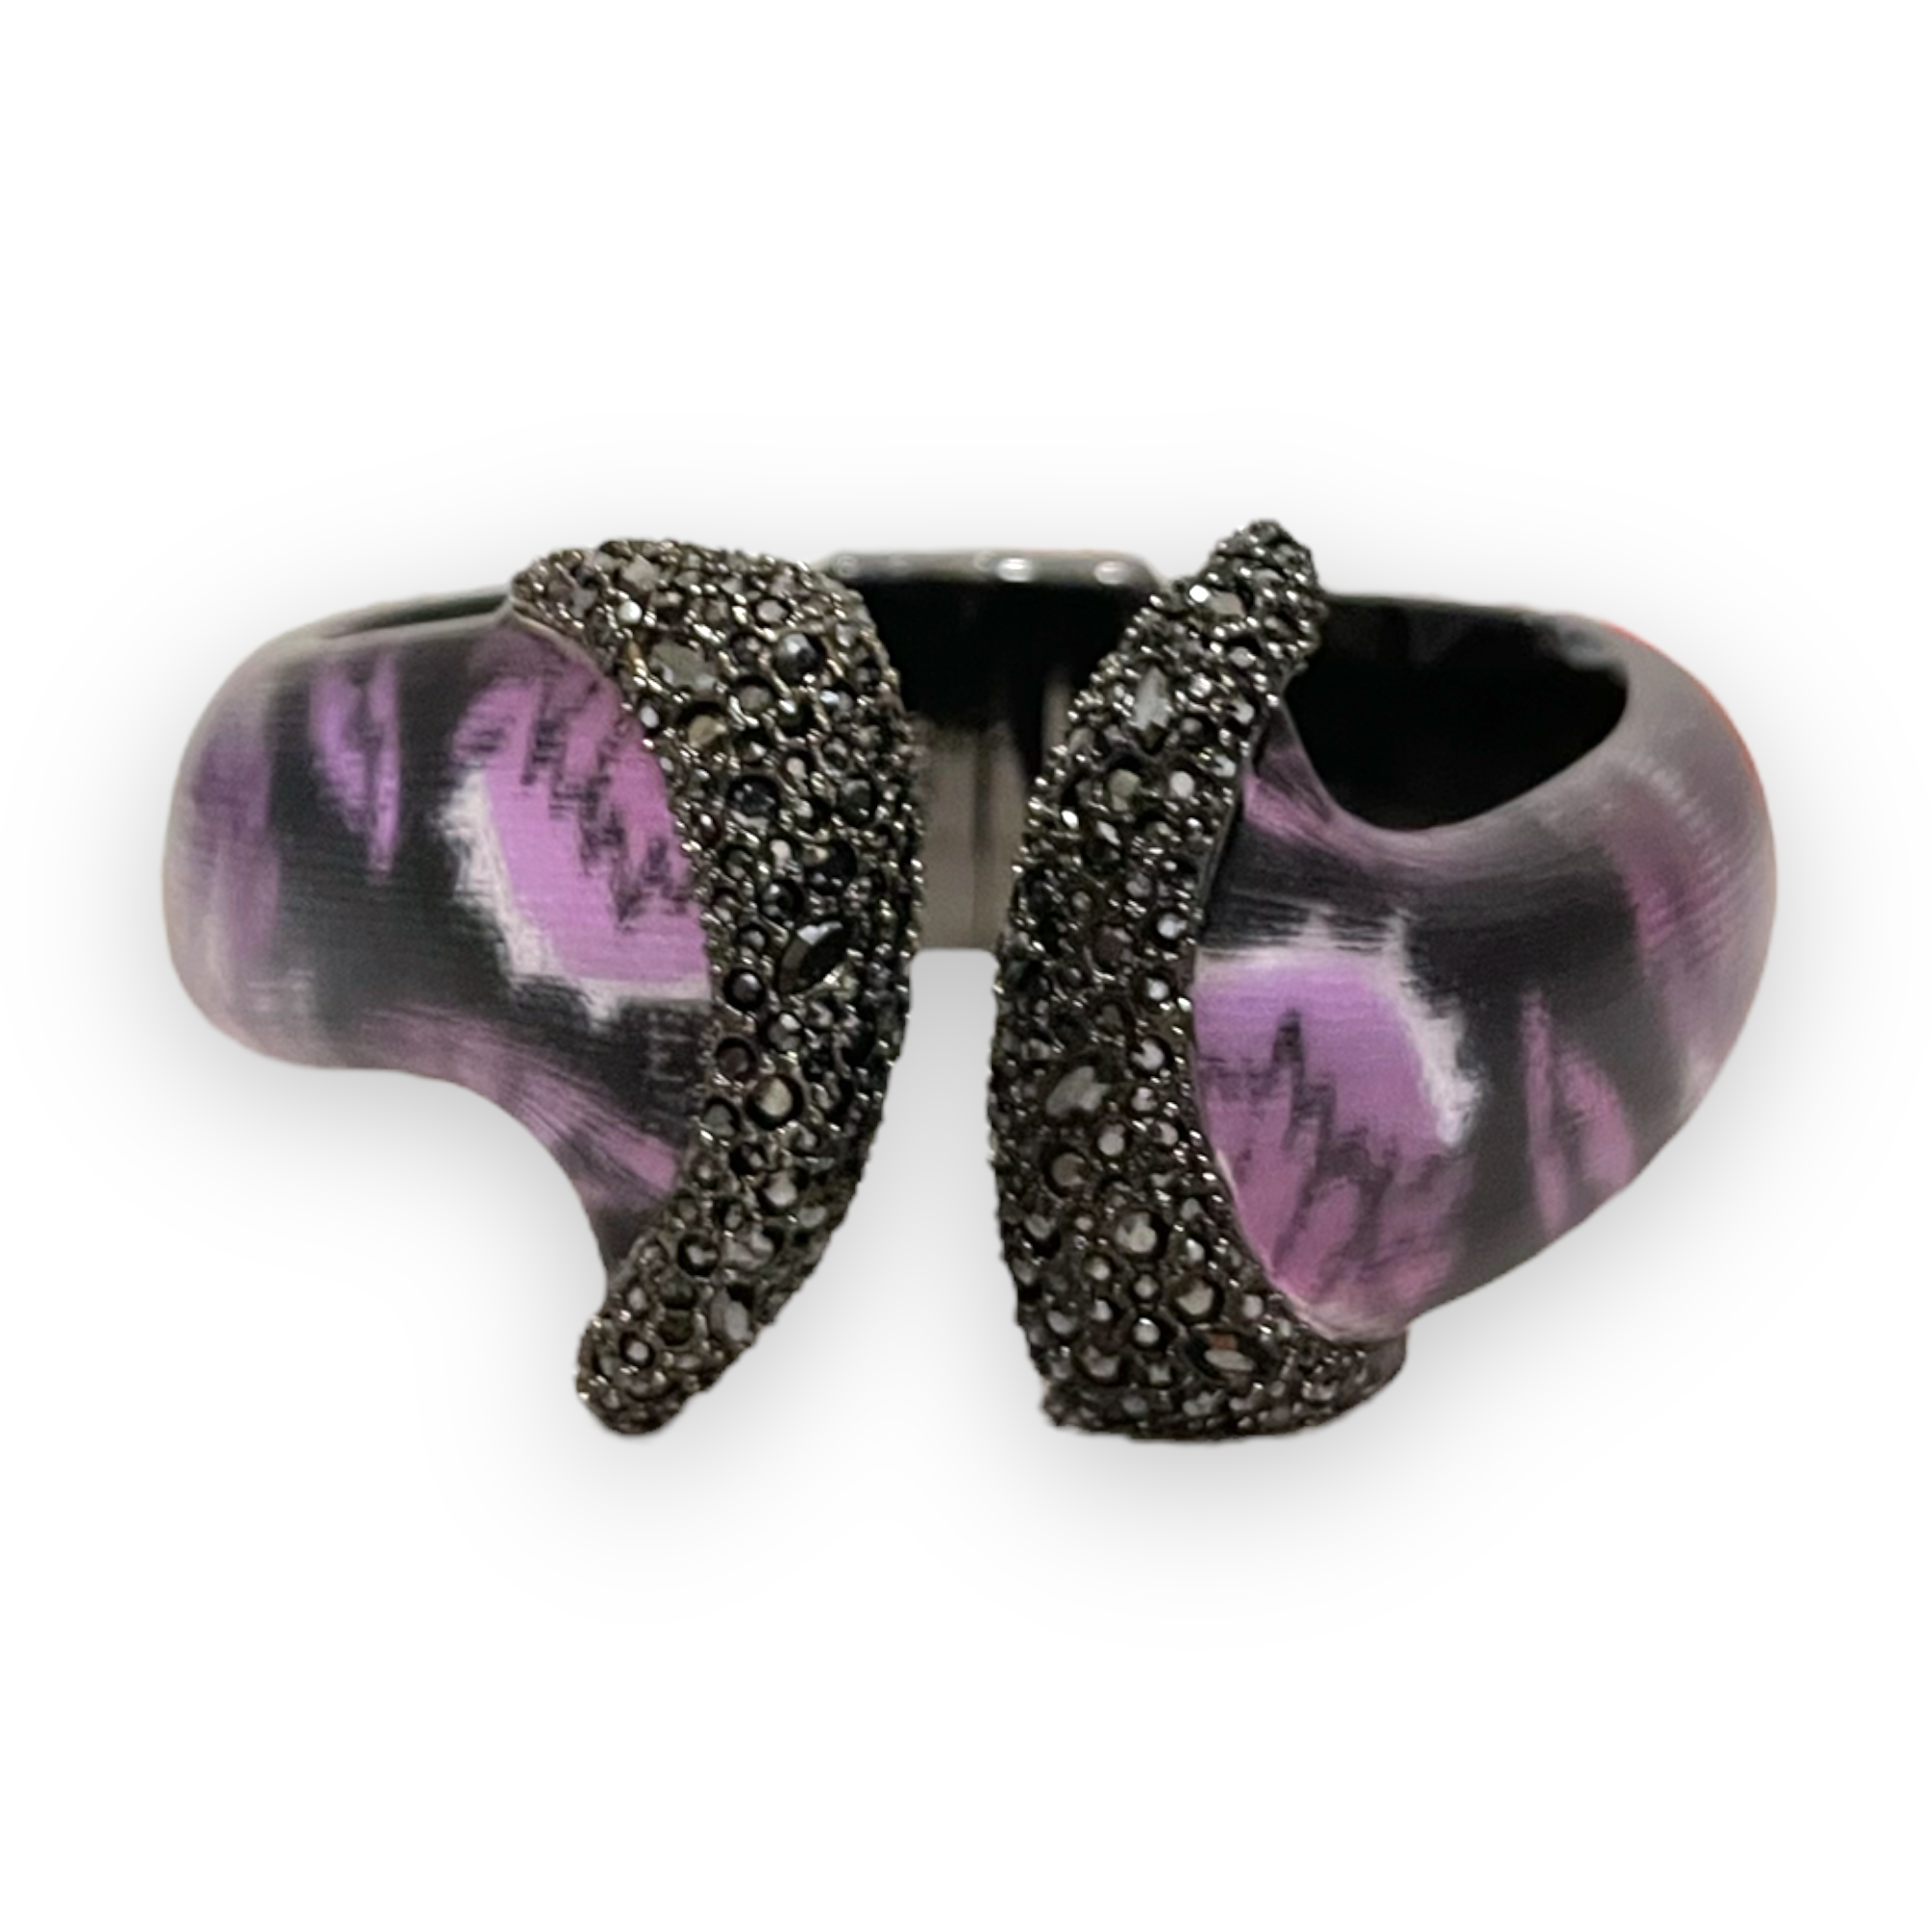 ALEXIS BITTAR Black Crystal & Hand Crafted Lucite Hinge Cuff